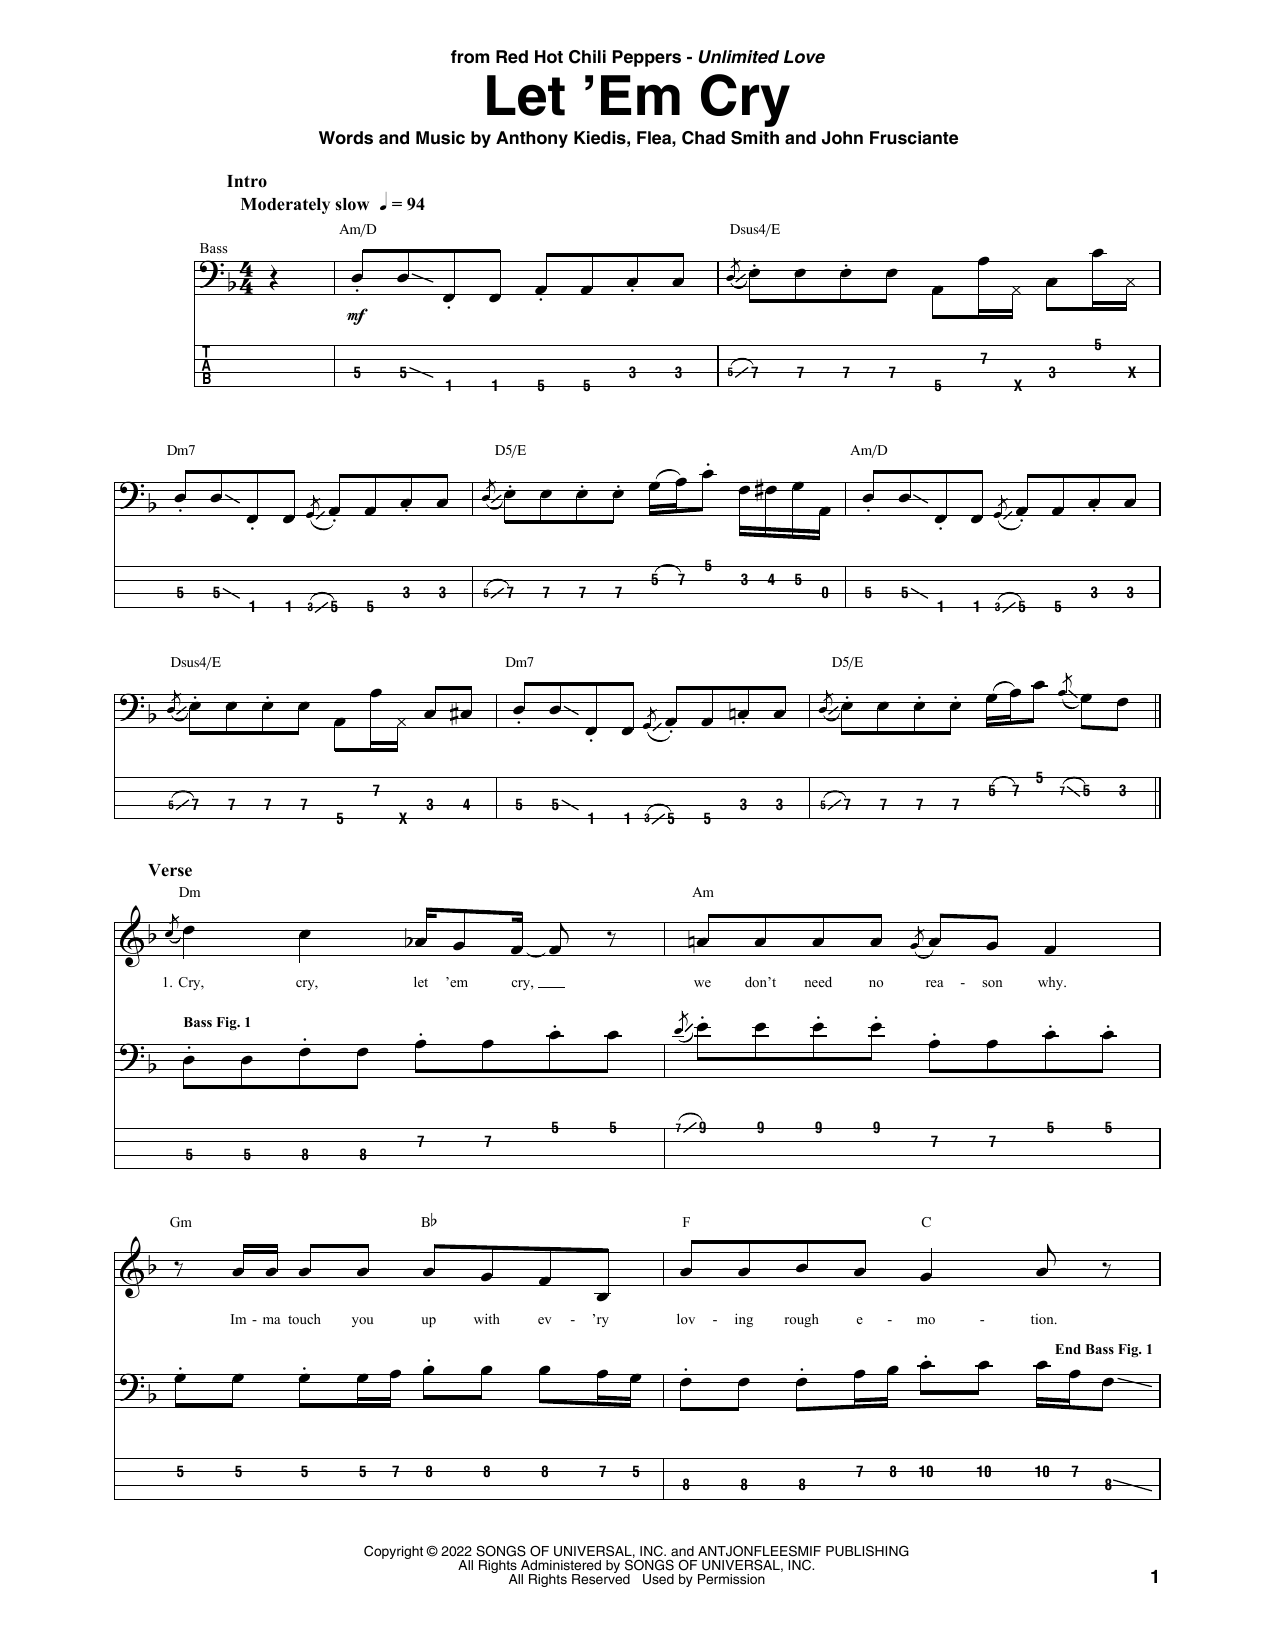 Download Red Hot Chili Peppers Let 'Em Cry Sheet Music